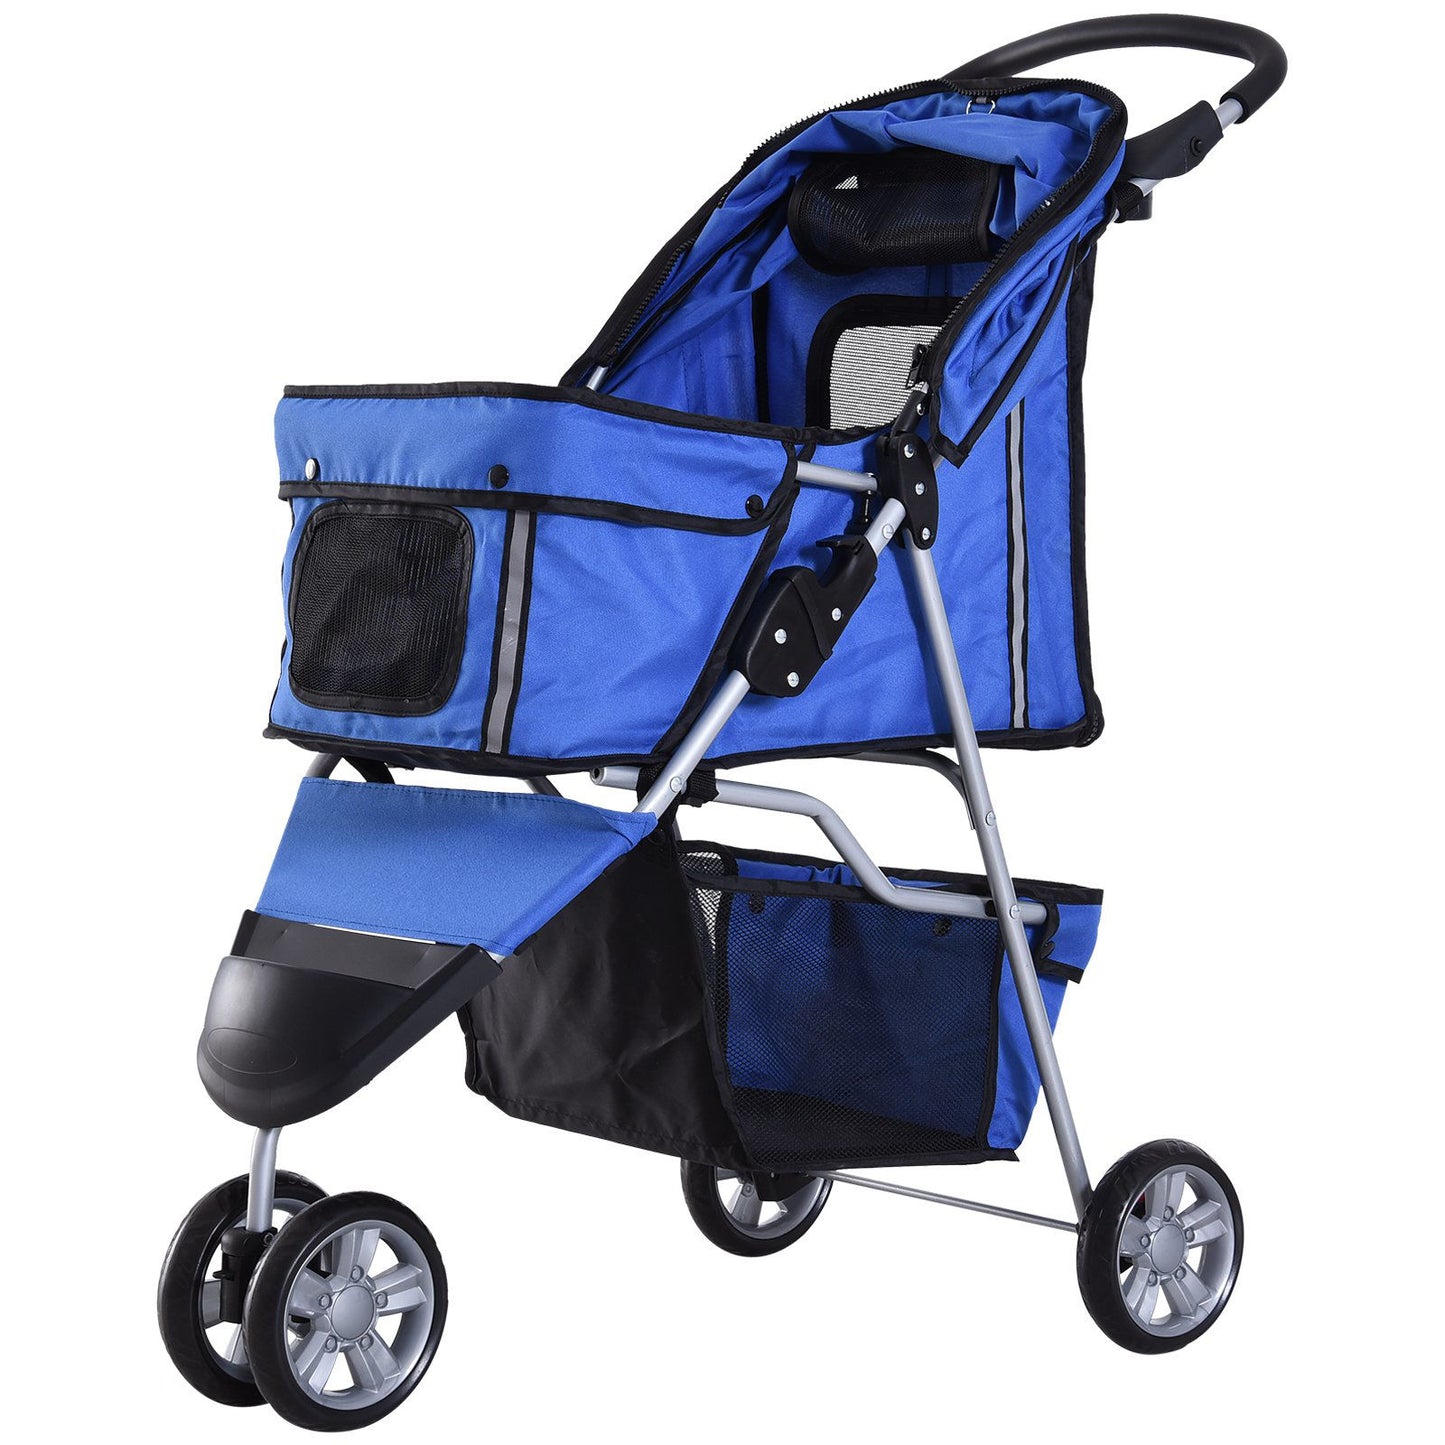 Nancy's The Chair Dog buggy dogs cats multicolored (blue)